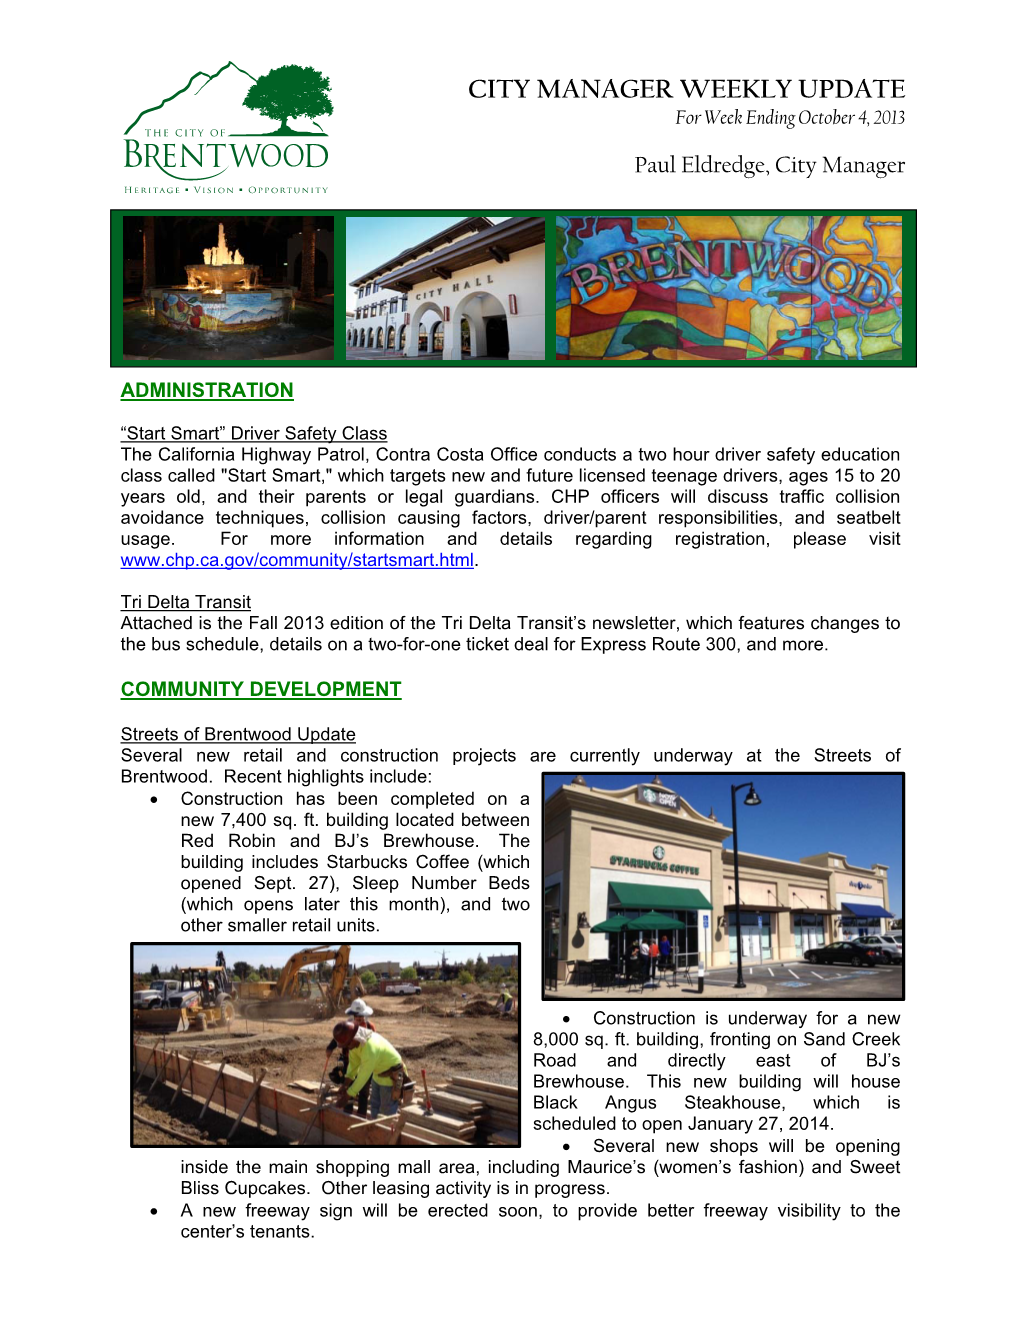 CITY MANAGER WEEKLY UPDATE for Week Ending October 4, 2013